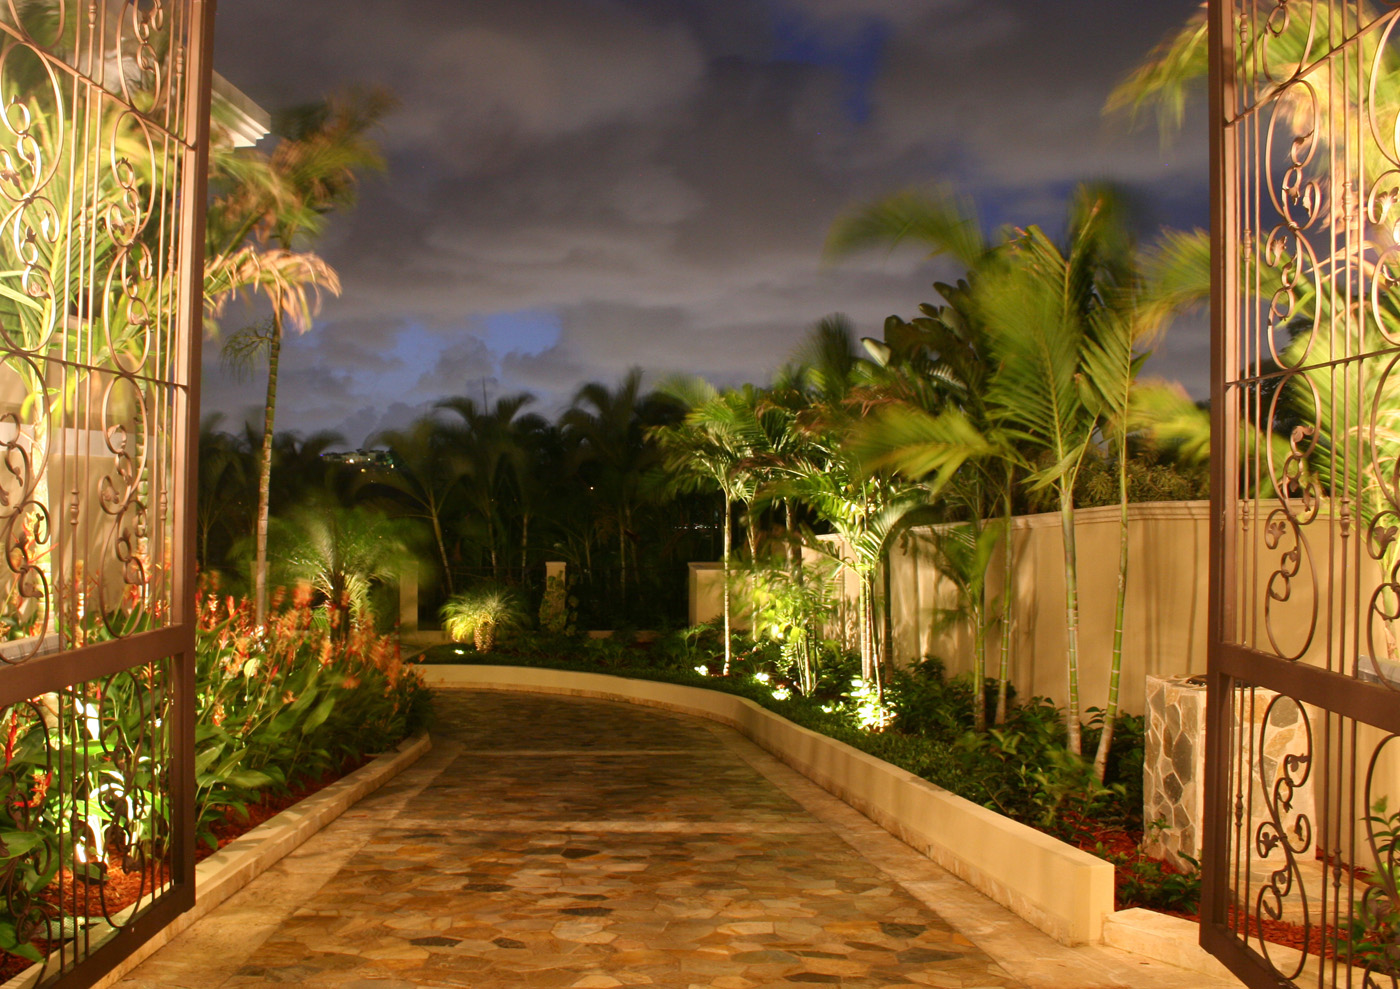 Outdoor lighting of a house's long driveway at night